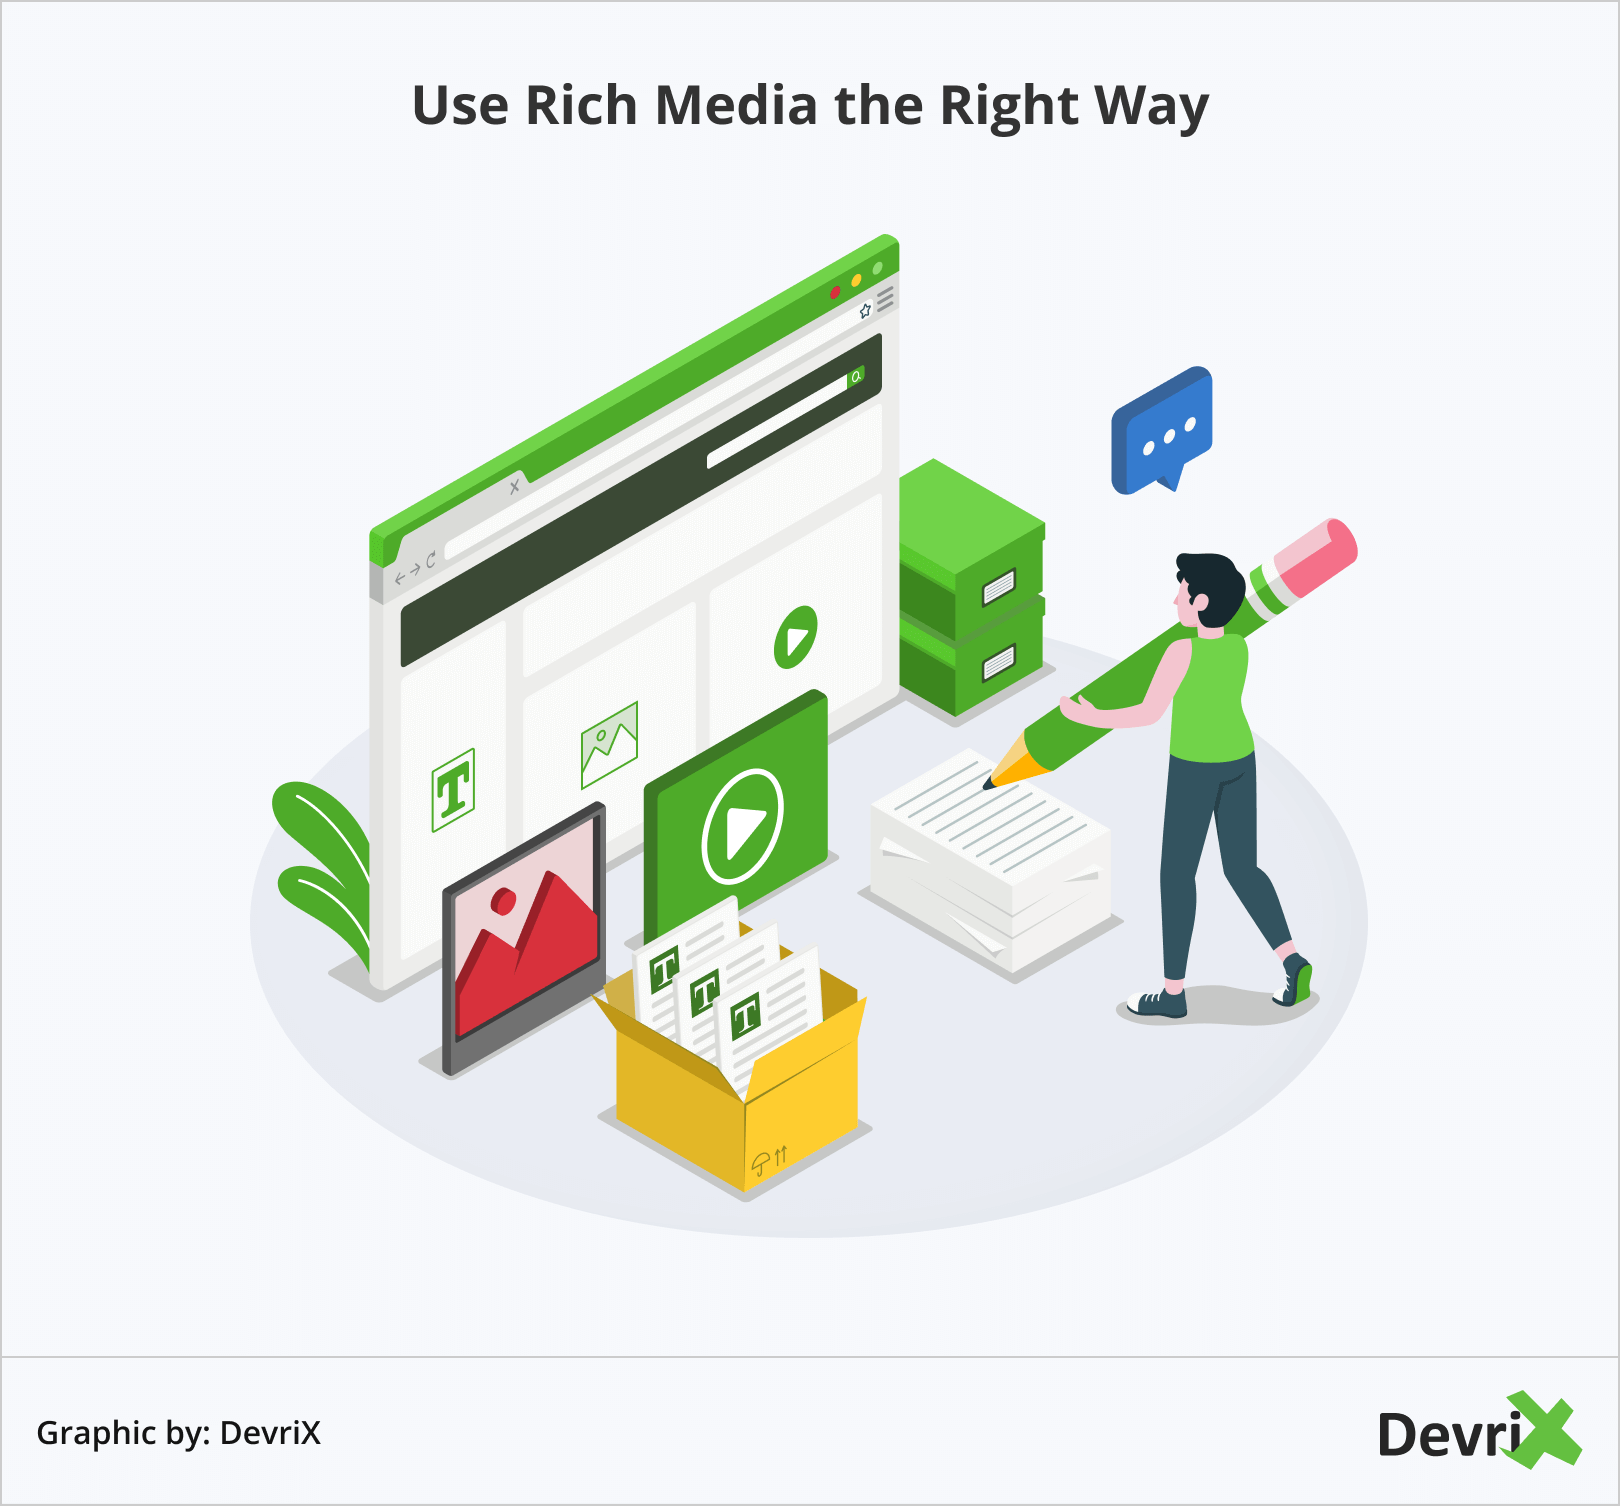 Use Rich Media the Right Way